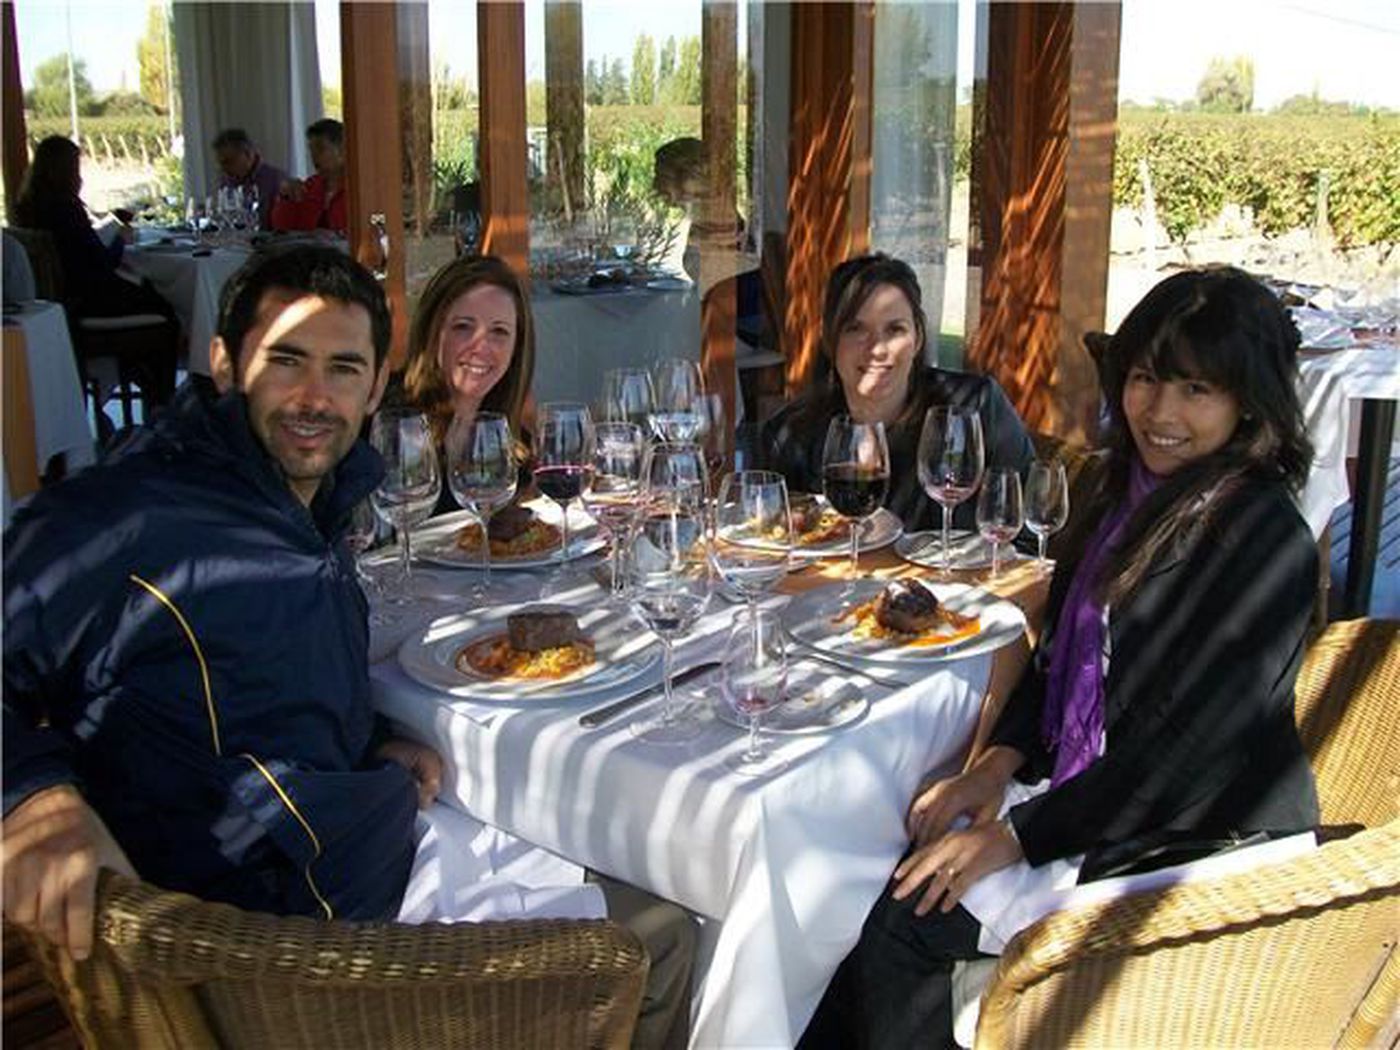 People enjoying a meal and wine in Mendoza